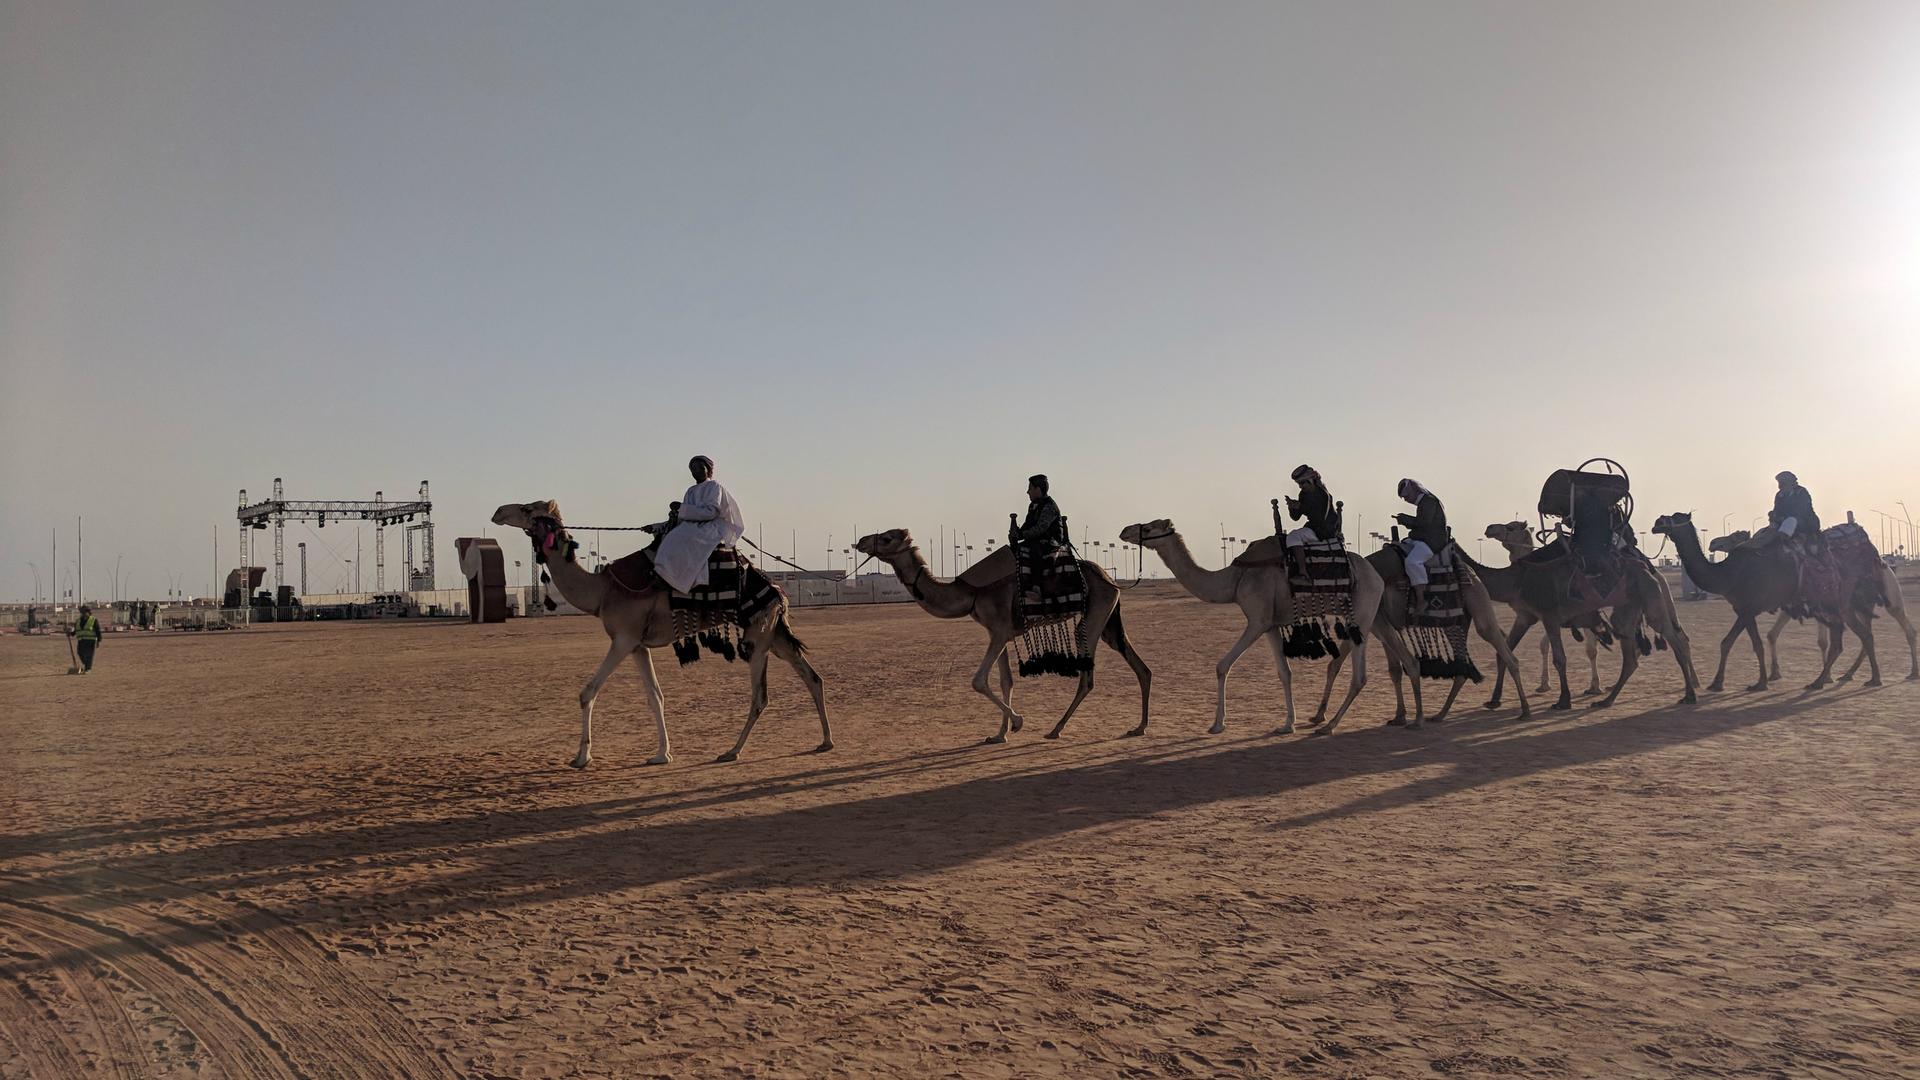 A man leads a caravan of camels at the King Abdulaziz Camel Festival in Saudi Arabia, a monthlong extravaganza honoring the “ships of the desert” and their place in the country’s history.